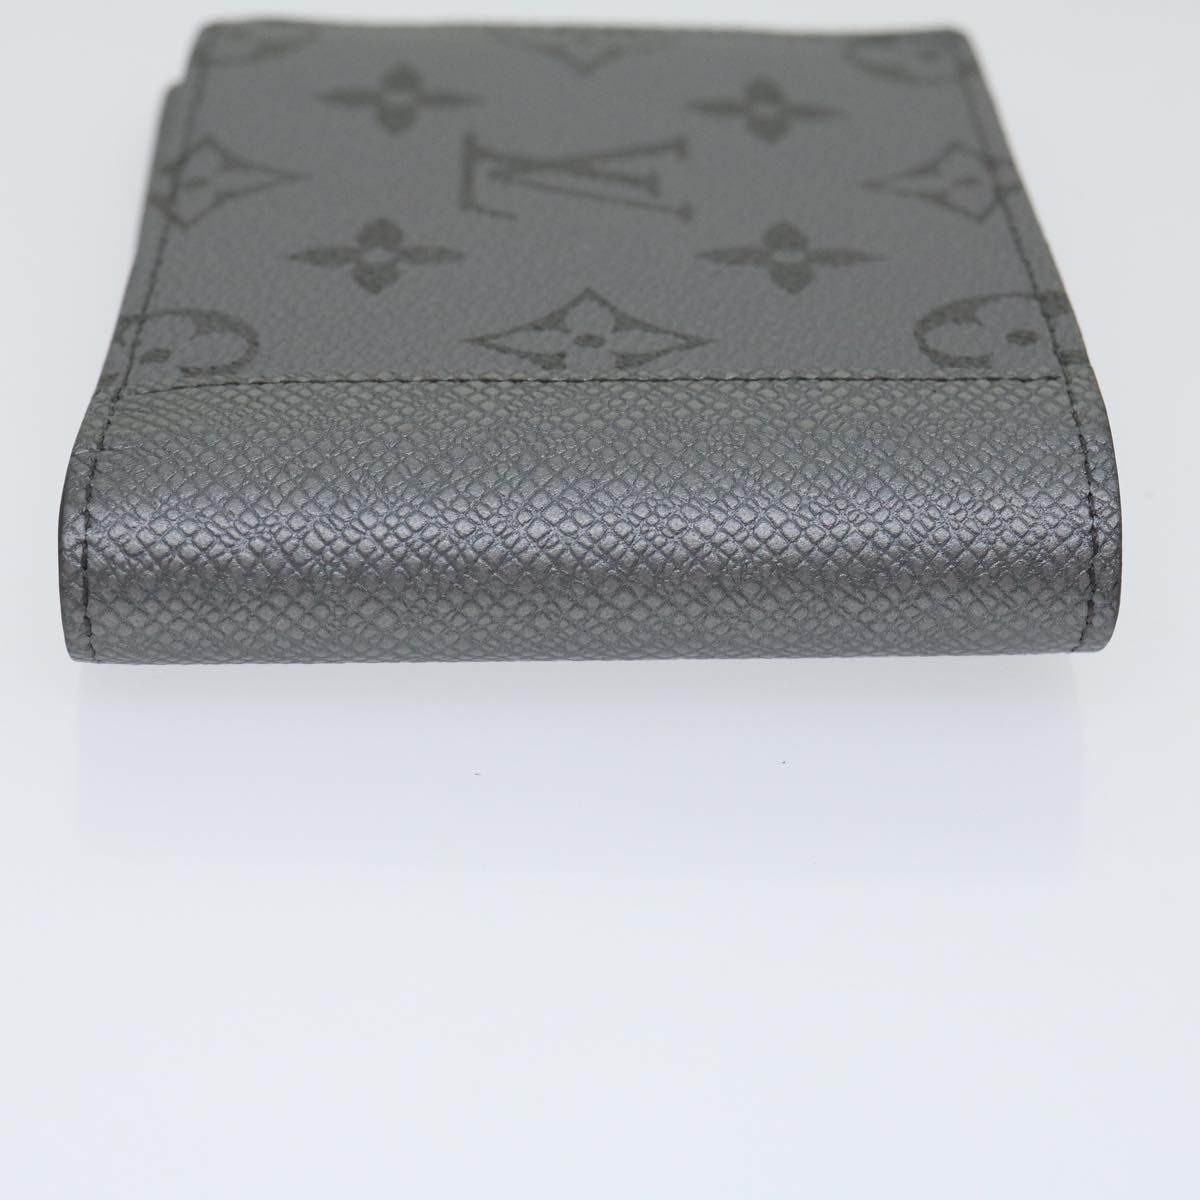 LOUIS VUITTON Taigalama Portefeuille Multipull Wallet Silver M30843 Auth 30046A